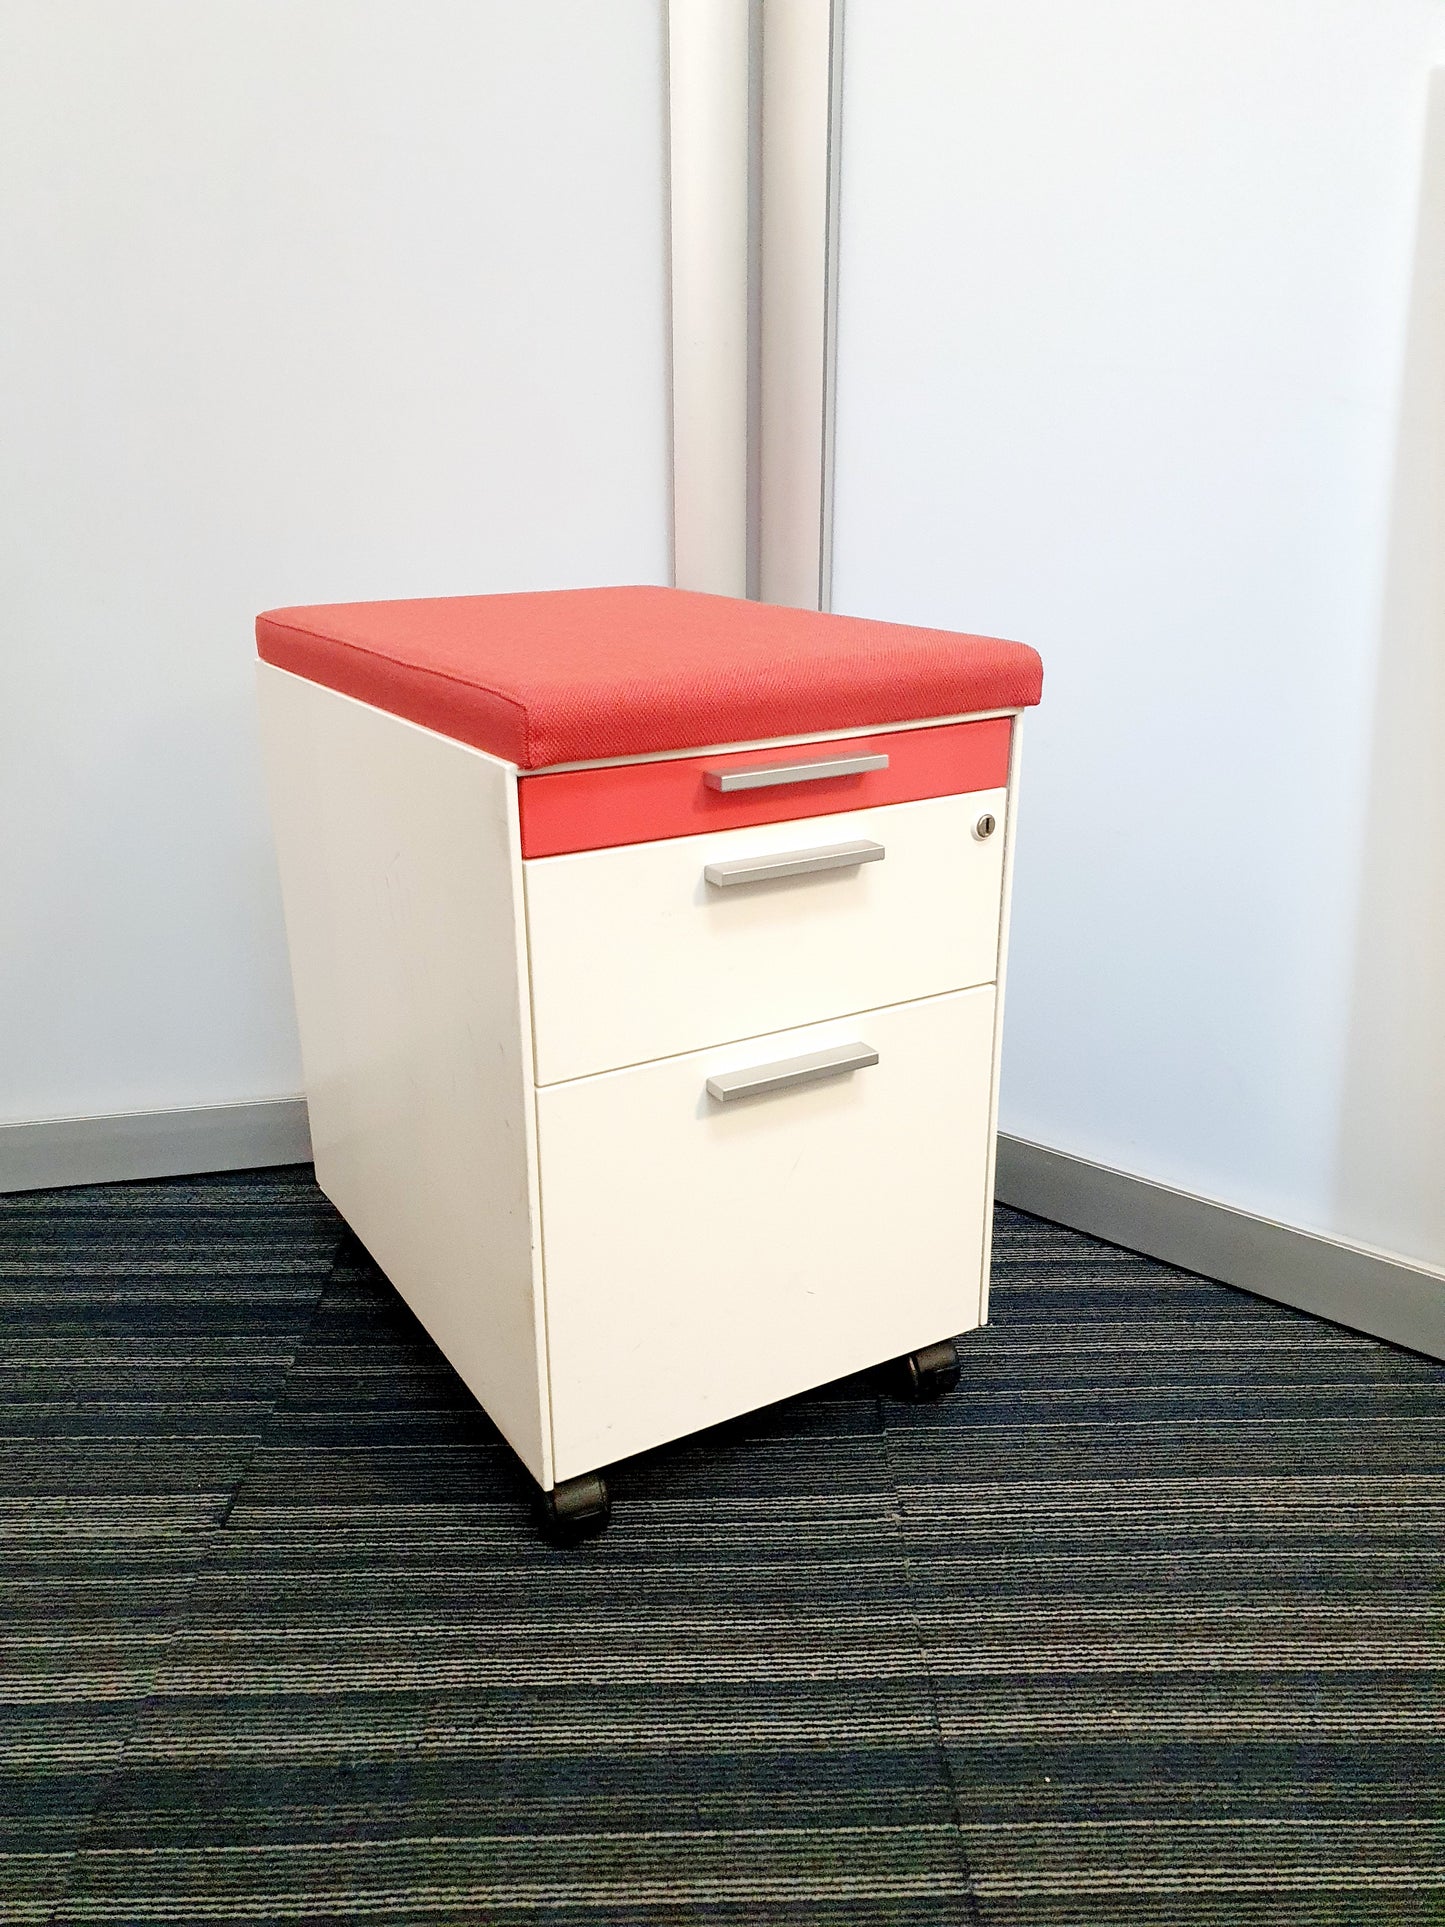 Gloss Office Contrast White / Coloured  3 Drawers Pedestals